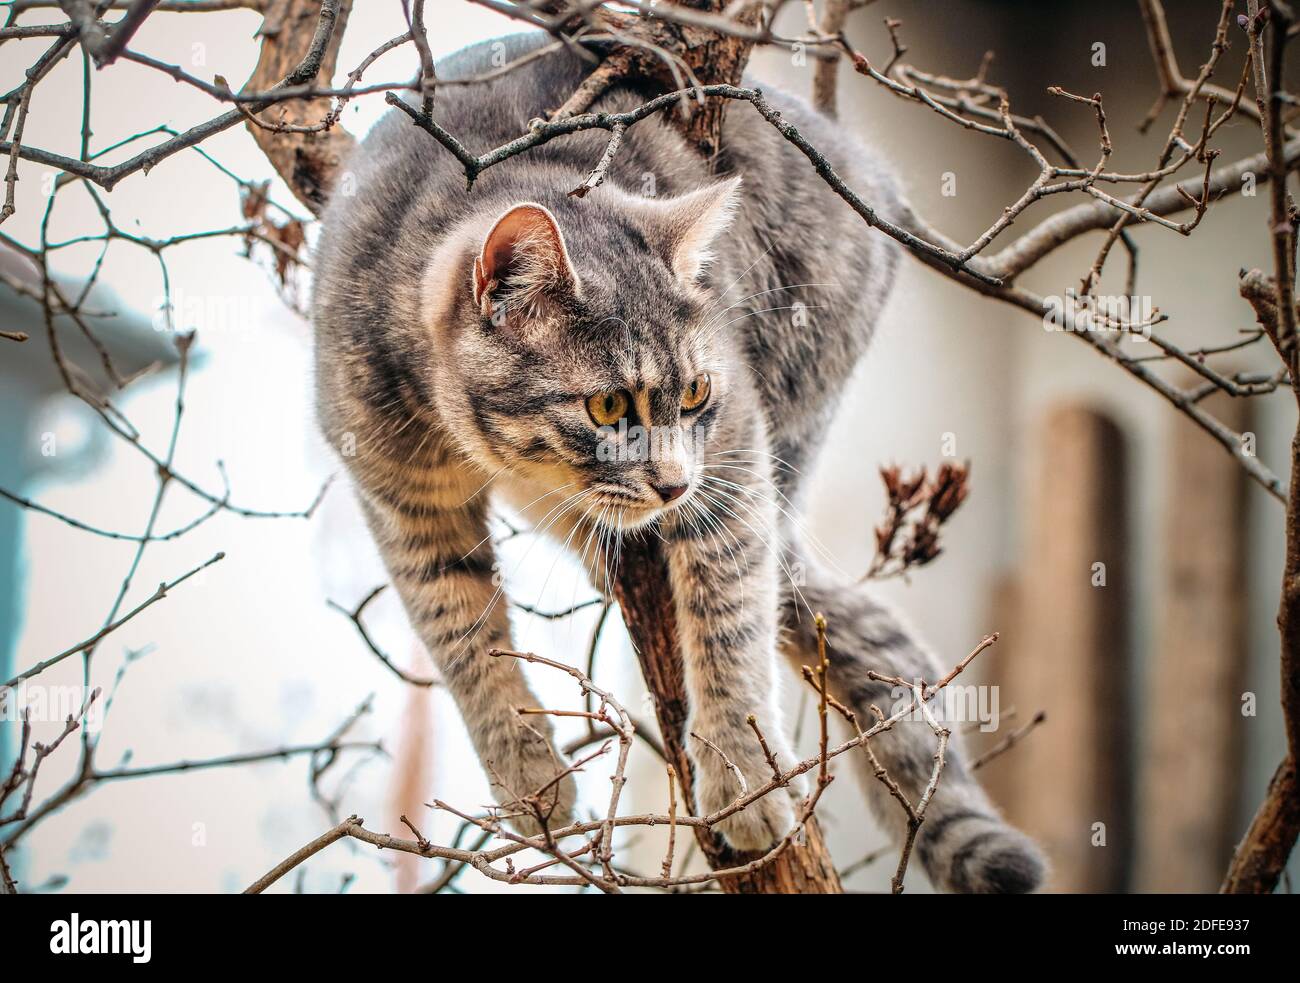 A cat climbing in the tree Stock Photo